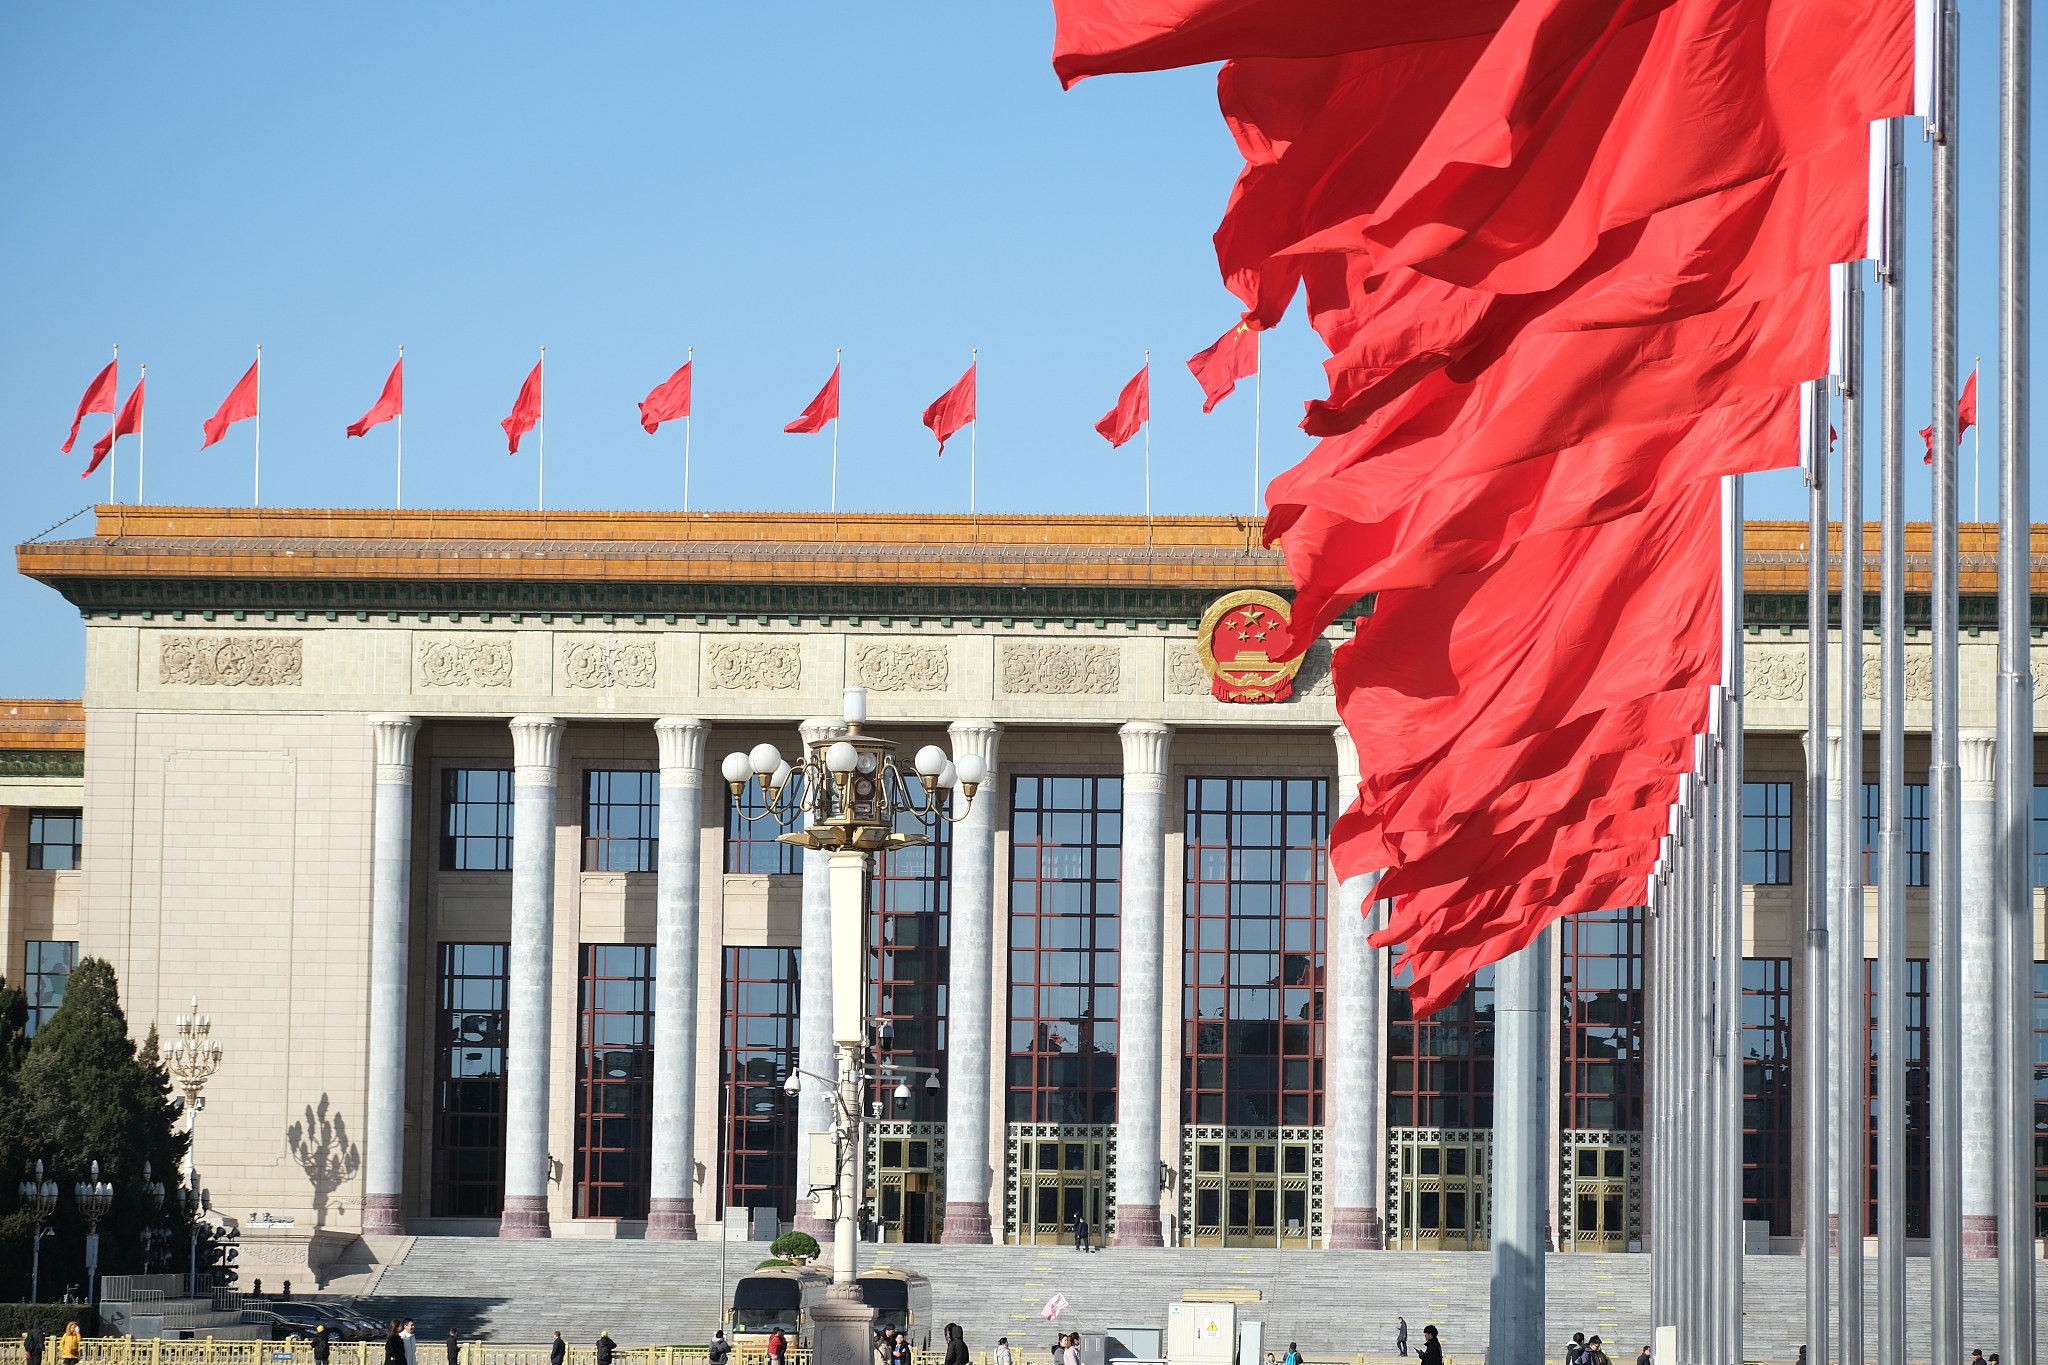 Red flags flutter in the wind outside the Great Hall of the People in Beijing on Sunday. Photo: VCG